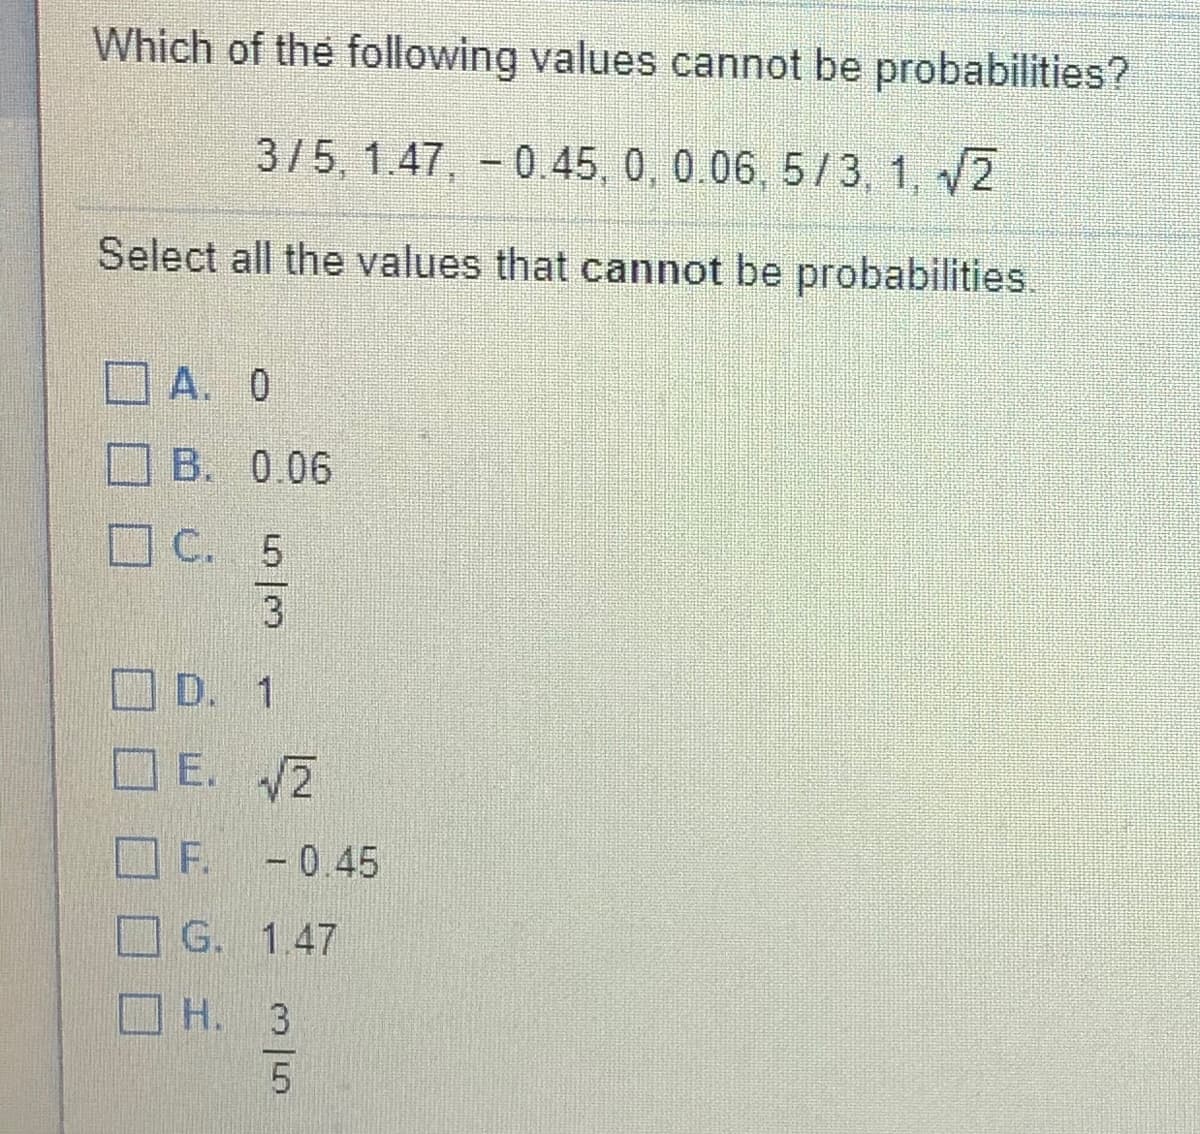 Which of the following values cannot be probabilities?
3/5, 1.47, - 0.45, 0, 0.06, 5/3, 1, 2
Select all the values that cannot be probabilities
A. 0
B. 0.06
C. 5
D. 1
E. 2
F. -0.45
G. 1.47
O H. 3
5.
5/3
